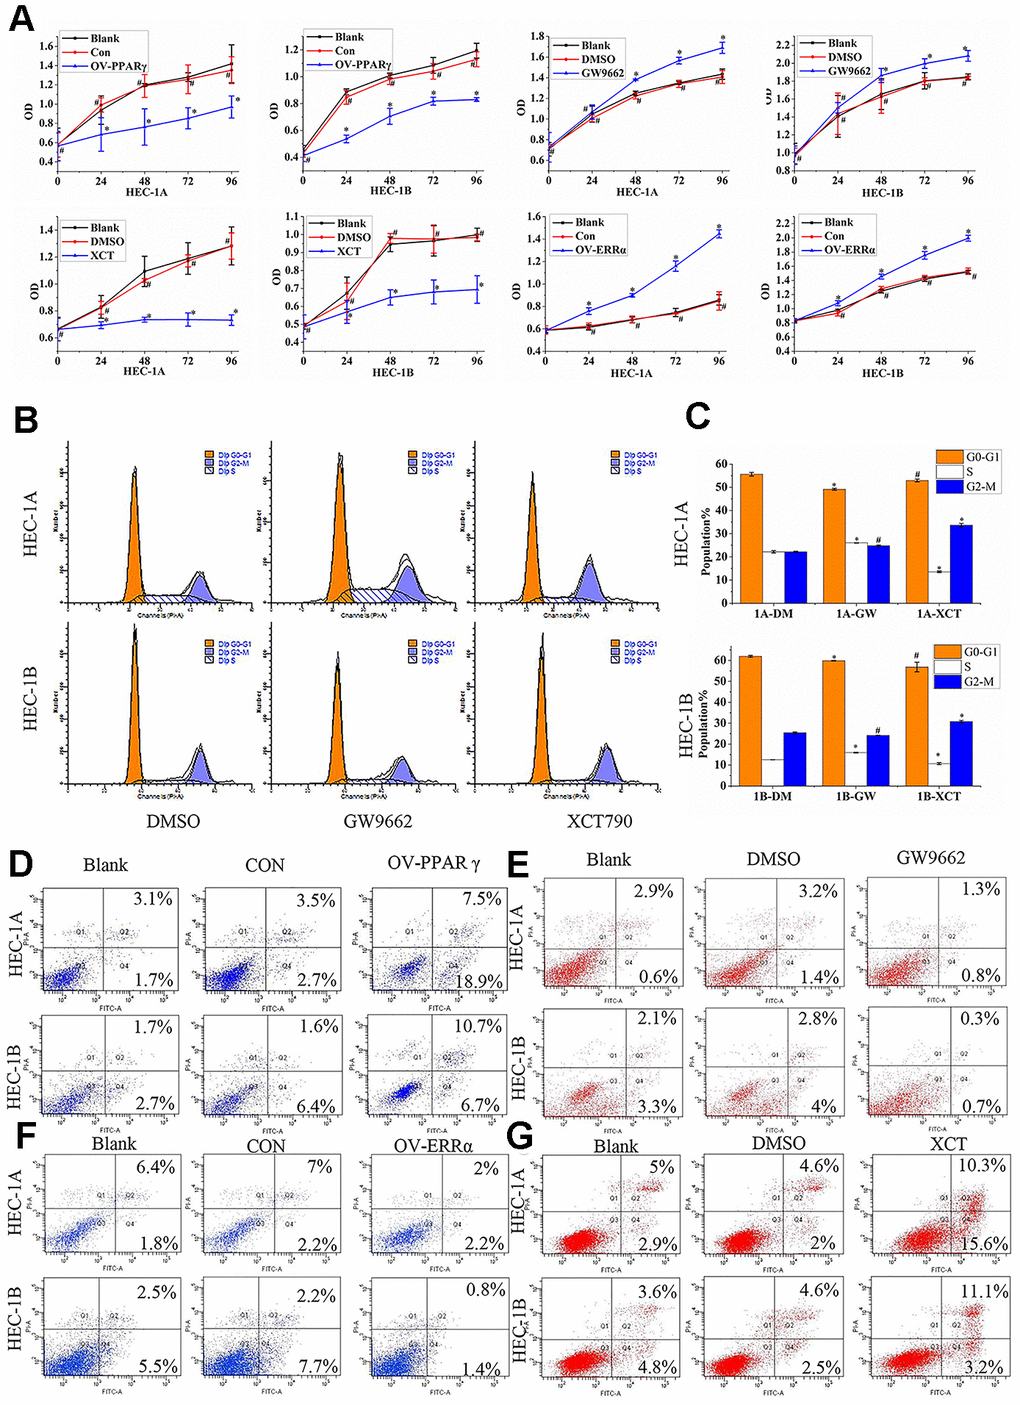 PPARγ and ERRα compete to control cell proliferation and promote apoptosis in EC cells. (A) The effect of OV-PPARγ, OV-ERRα, GW9662 or XCT790 on proliferation. The OD values of HCE-1A and HEC-1B cells were detected at 0, 24, 48, 72, and 96 h after transfection with lentivirus or treatment with ERRα and PPARγ antagonists. (B, C) The effect of GW9662 or XCT790 on the cell cycle. HEC-1A and HEC-1B cells were treated with DMSO, GW9662 (5 μM) or XCT790 (10 μM) for 72 h. (D, E) The effect of OV-PPARγ or GW9662 on apoptosis.(F, G) The effect of OV-ERRα or XCT790 on apoptosis. OV-PPARγ: overexpression of PPARγ; OV-ERRα: overexpression of ERRα. EC, endometrial cancer. *, P0.05.